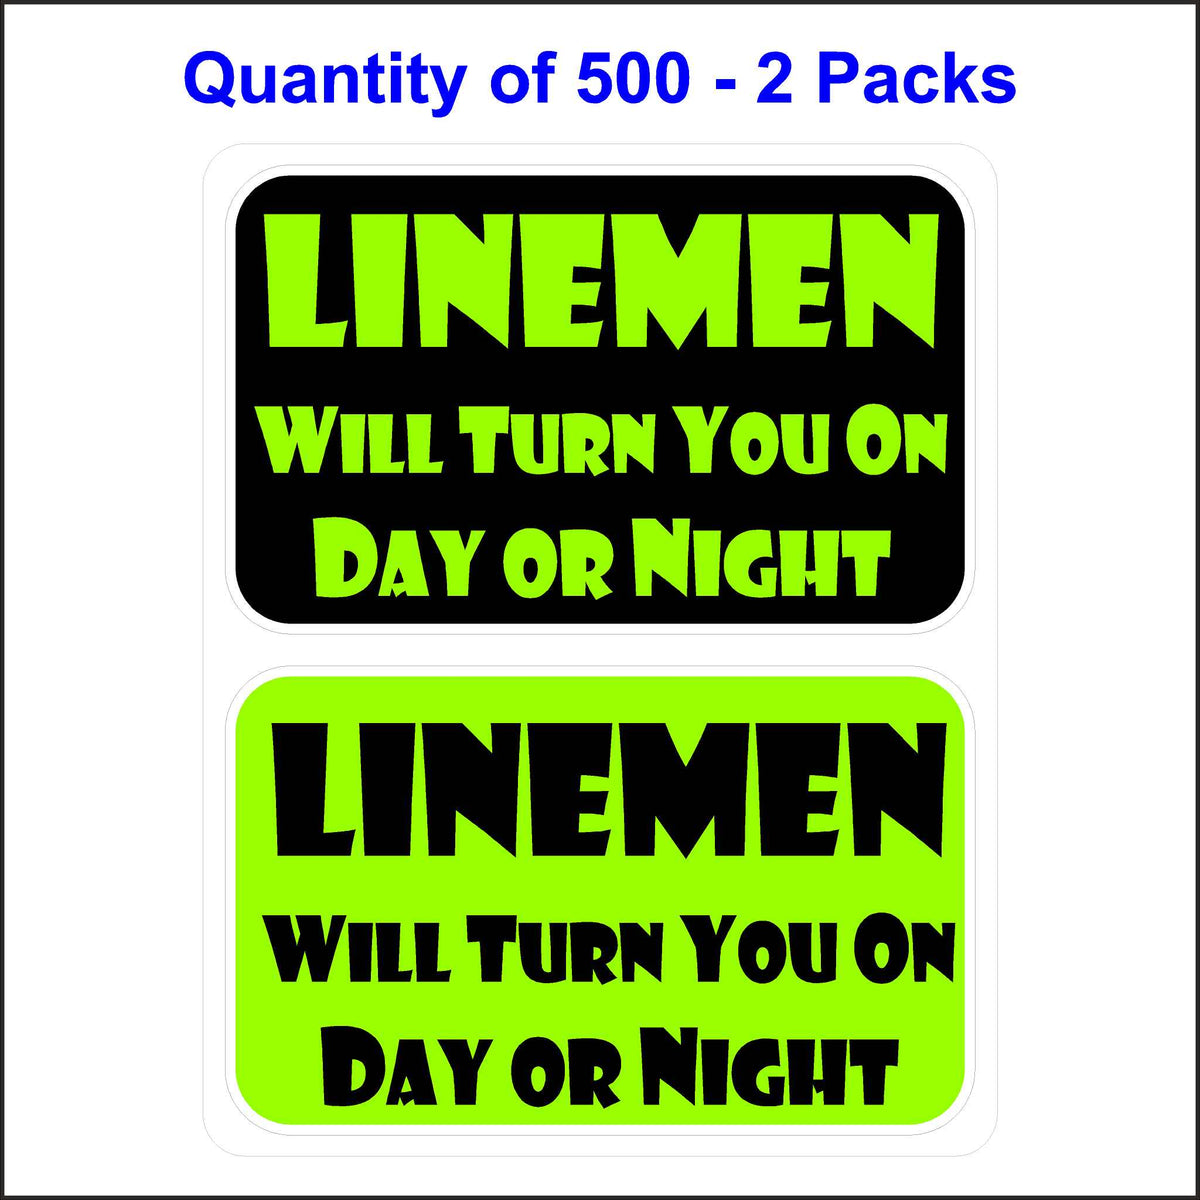 Lineman Will Turn You on Day or Night Stickers. 500 Quantity.